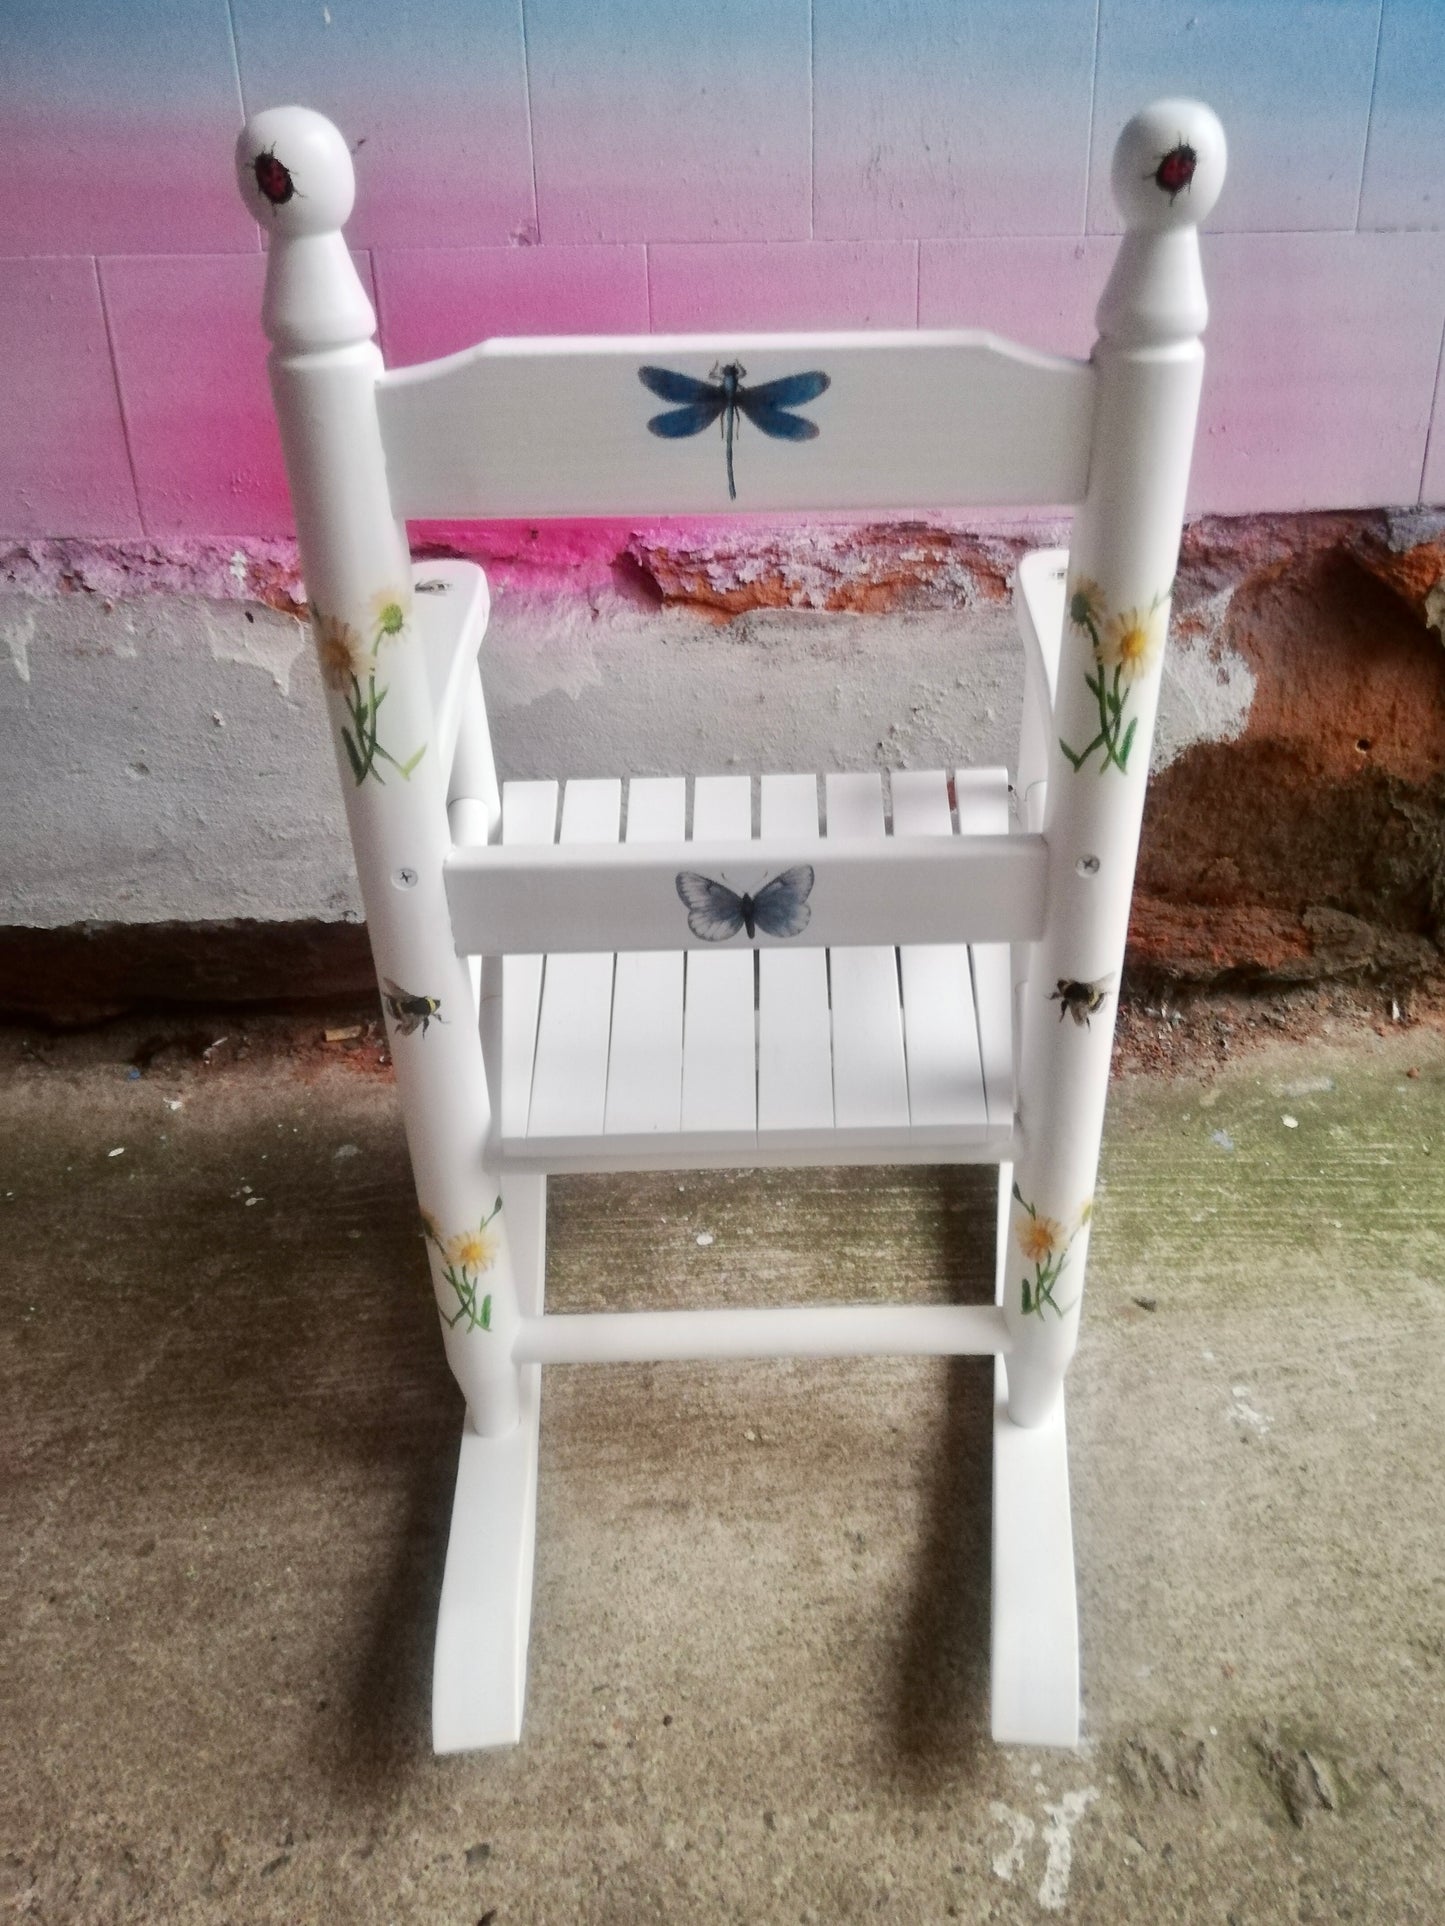 Commission for George personalised children's rocking chair - dragonfly theme